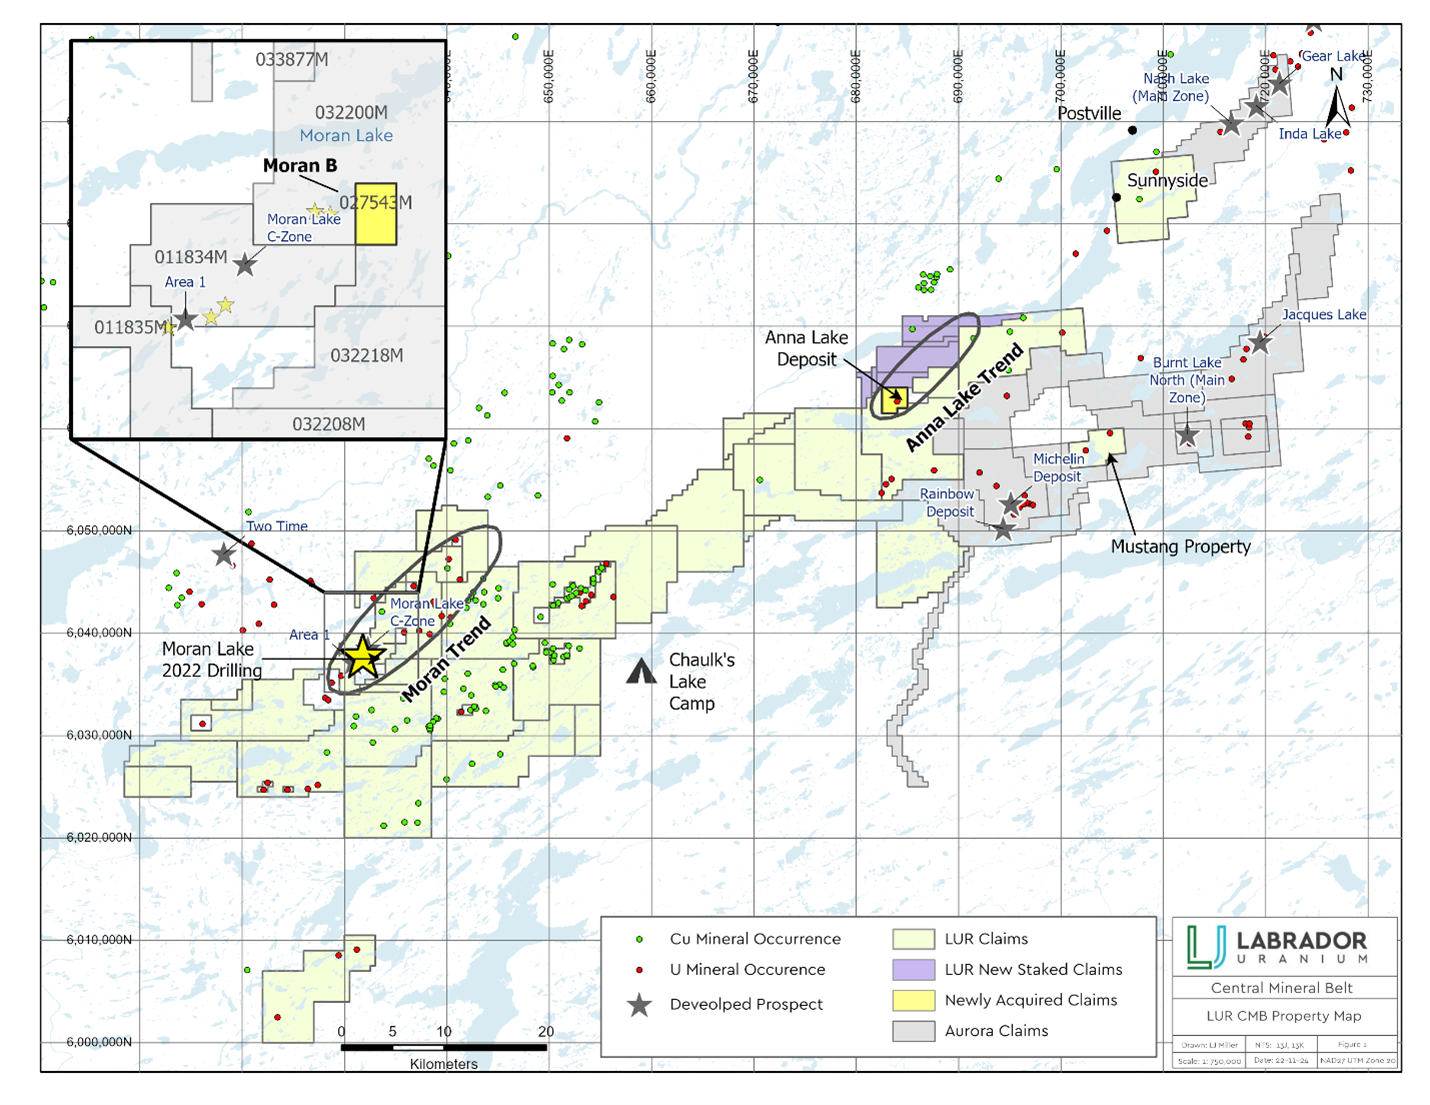 Labrador Uranium Projects and Claims on the Central Mineral Belt in Labrador.